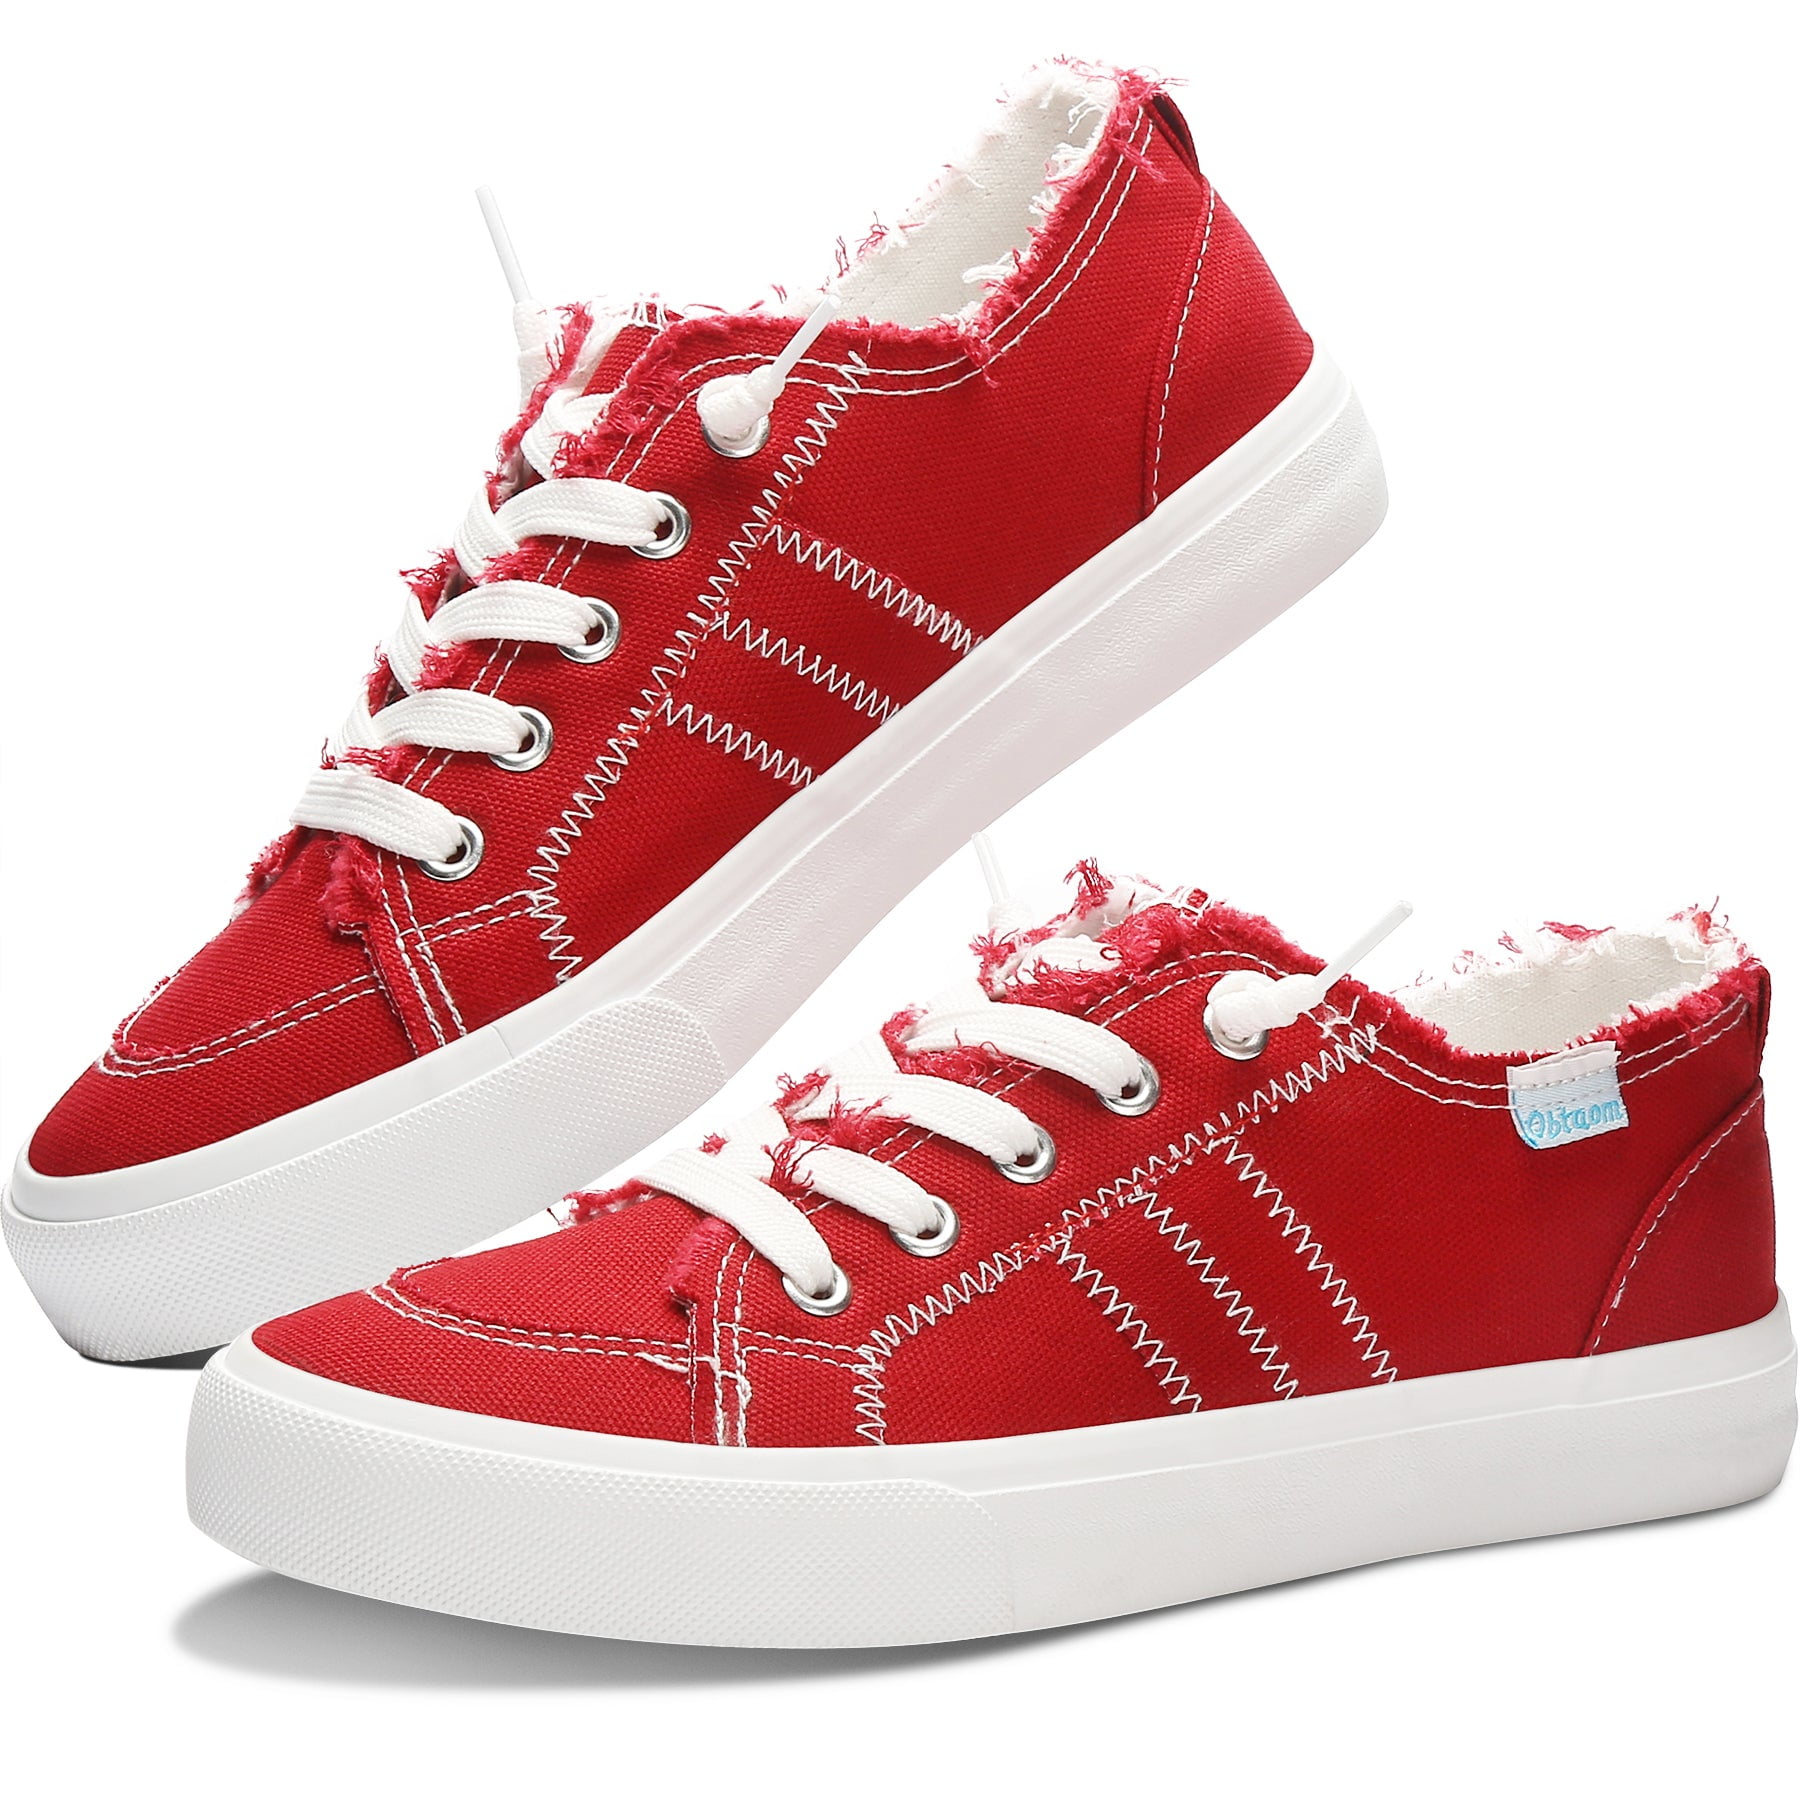 Mission Statement Sneakers (Women's) | Girls Inc. of Central Alabama